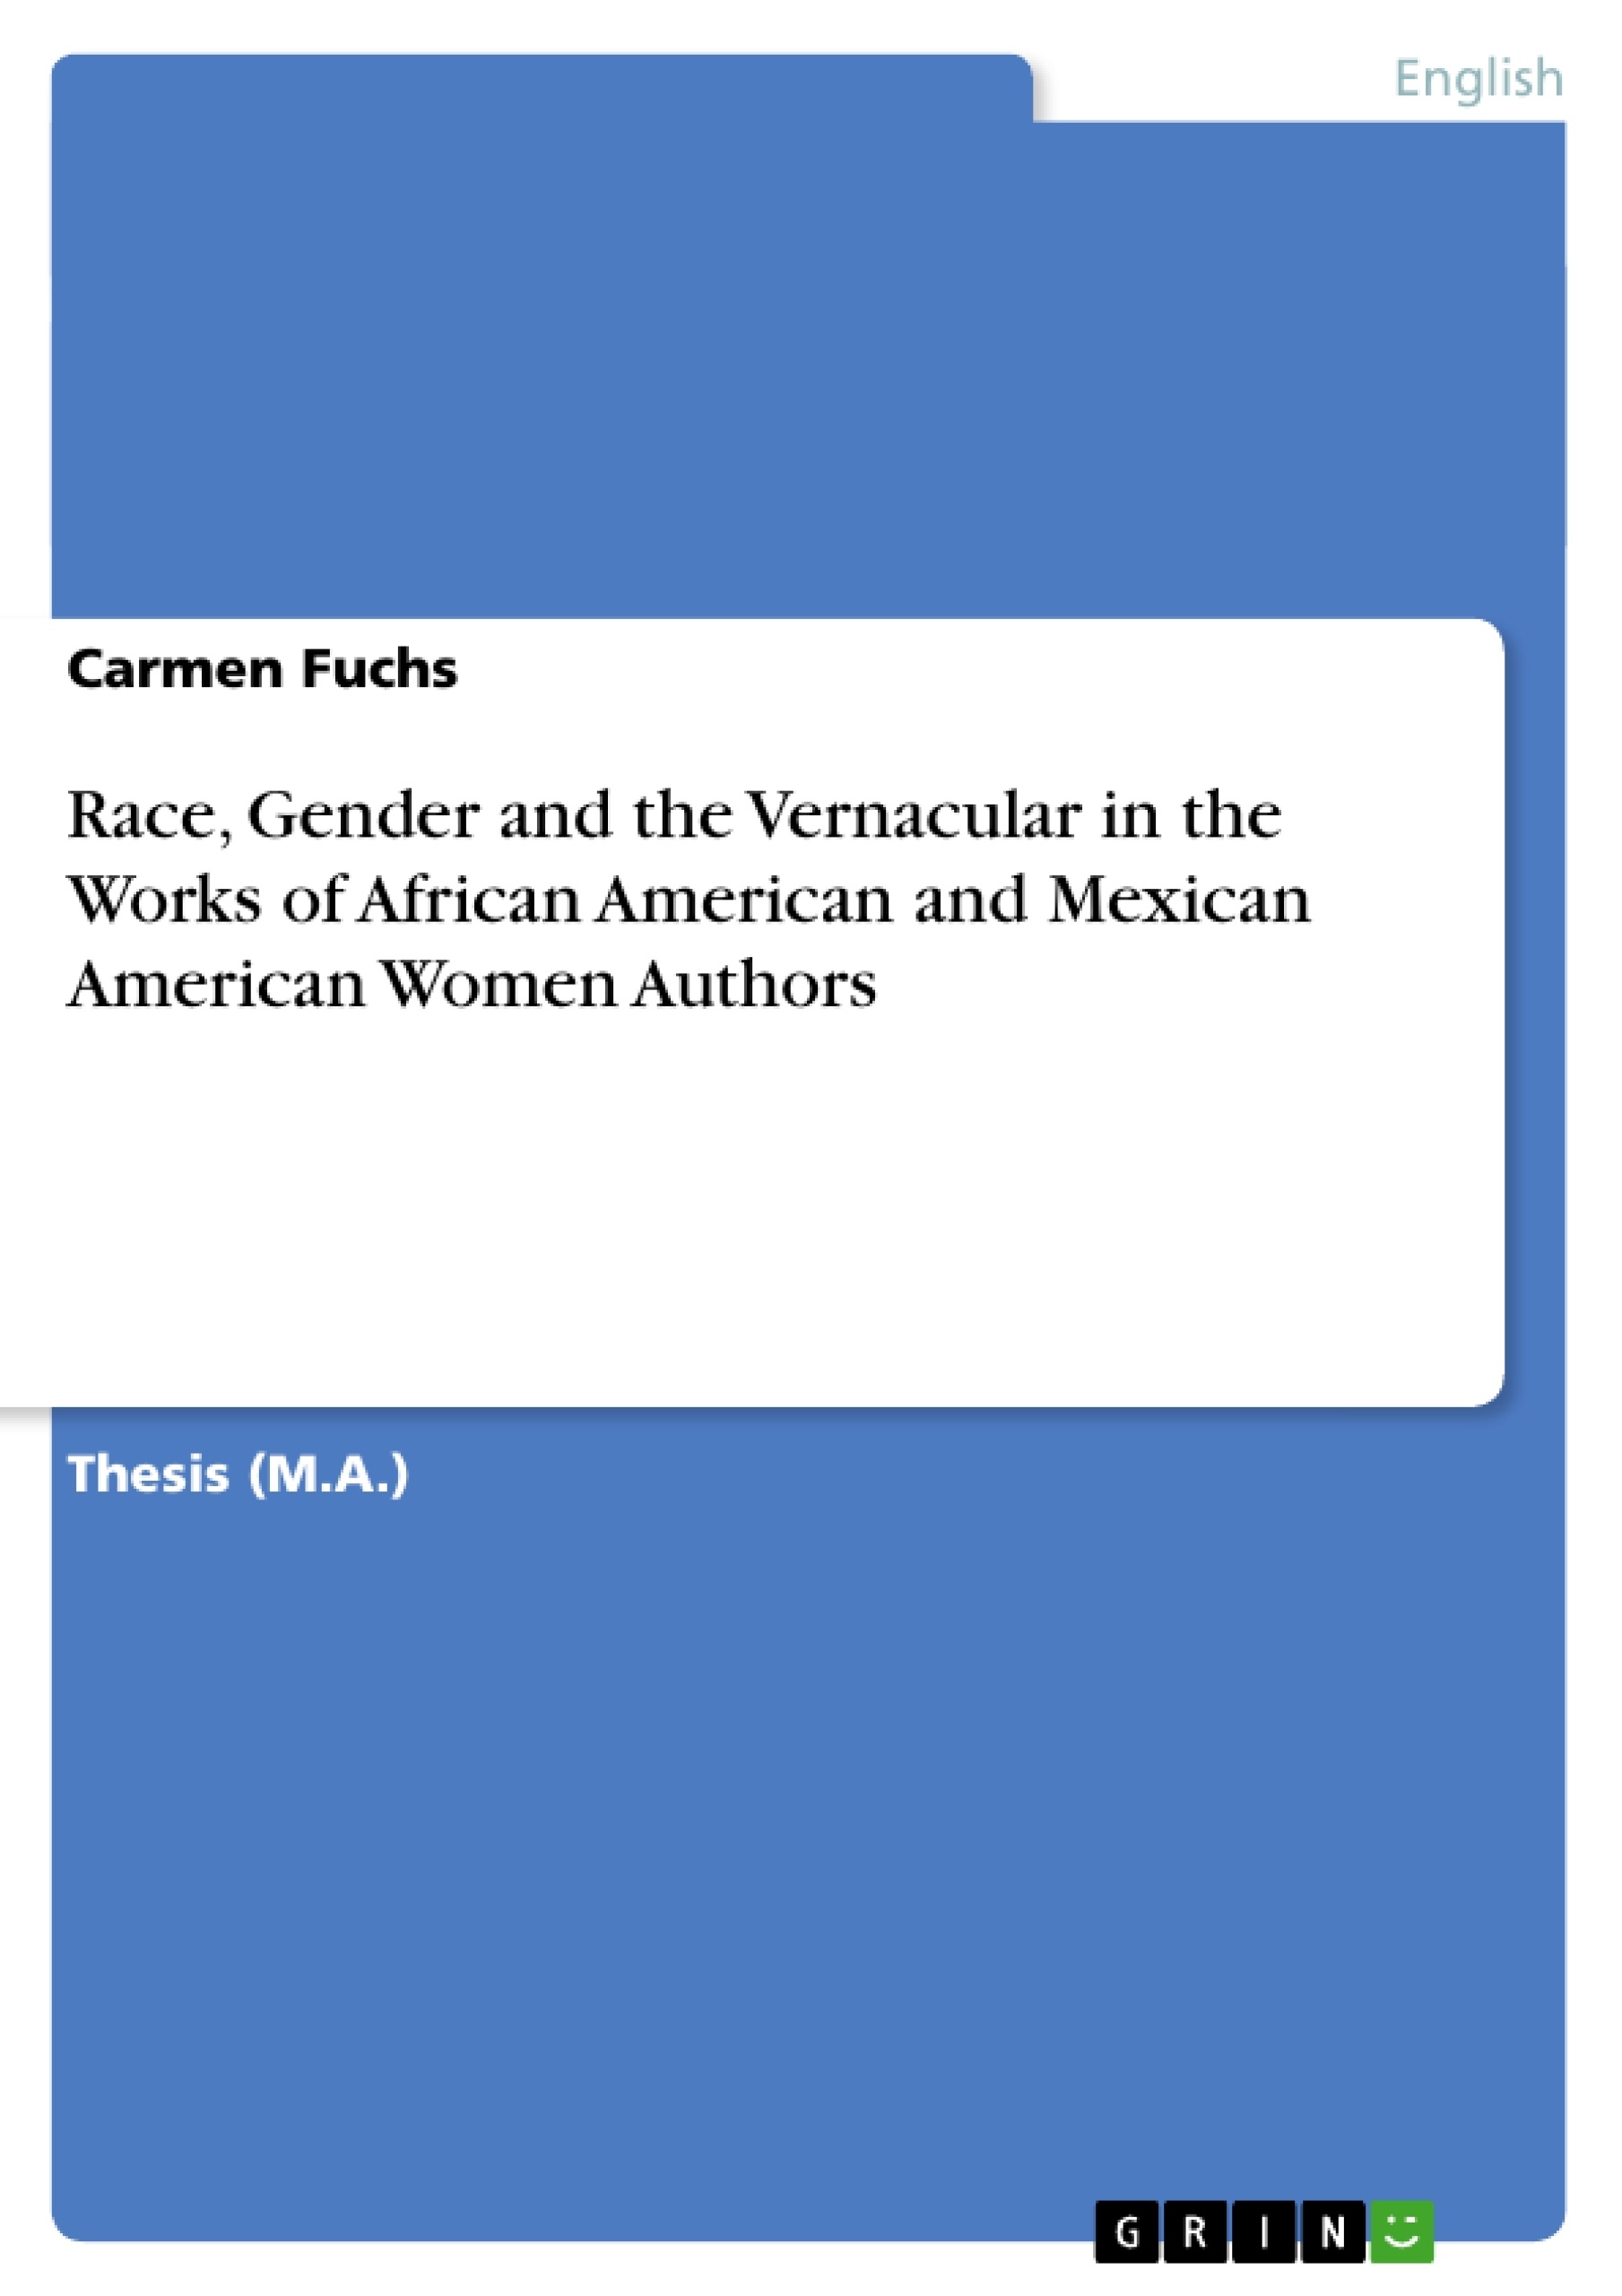 Titre: Race, Gender and the Vernacular in the Works of African American and Mexican American Women Authors